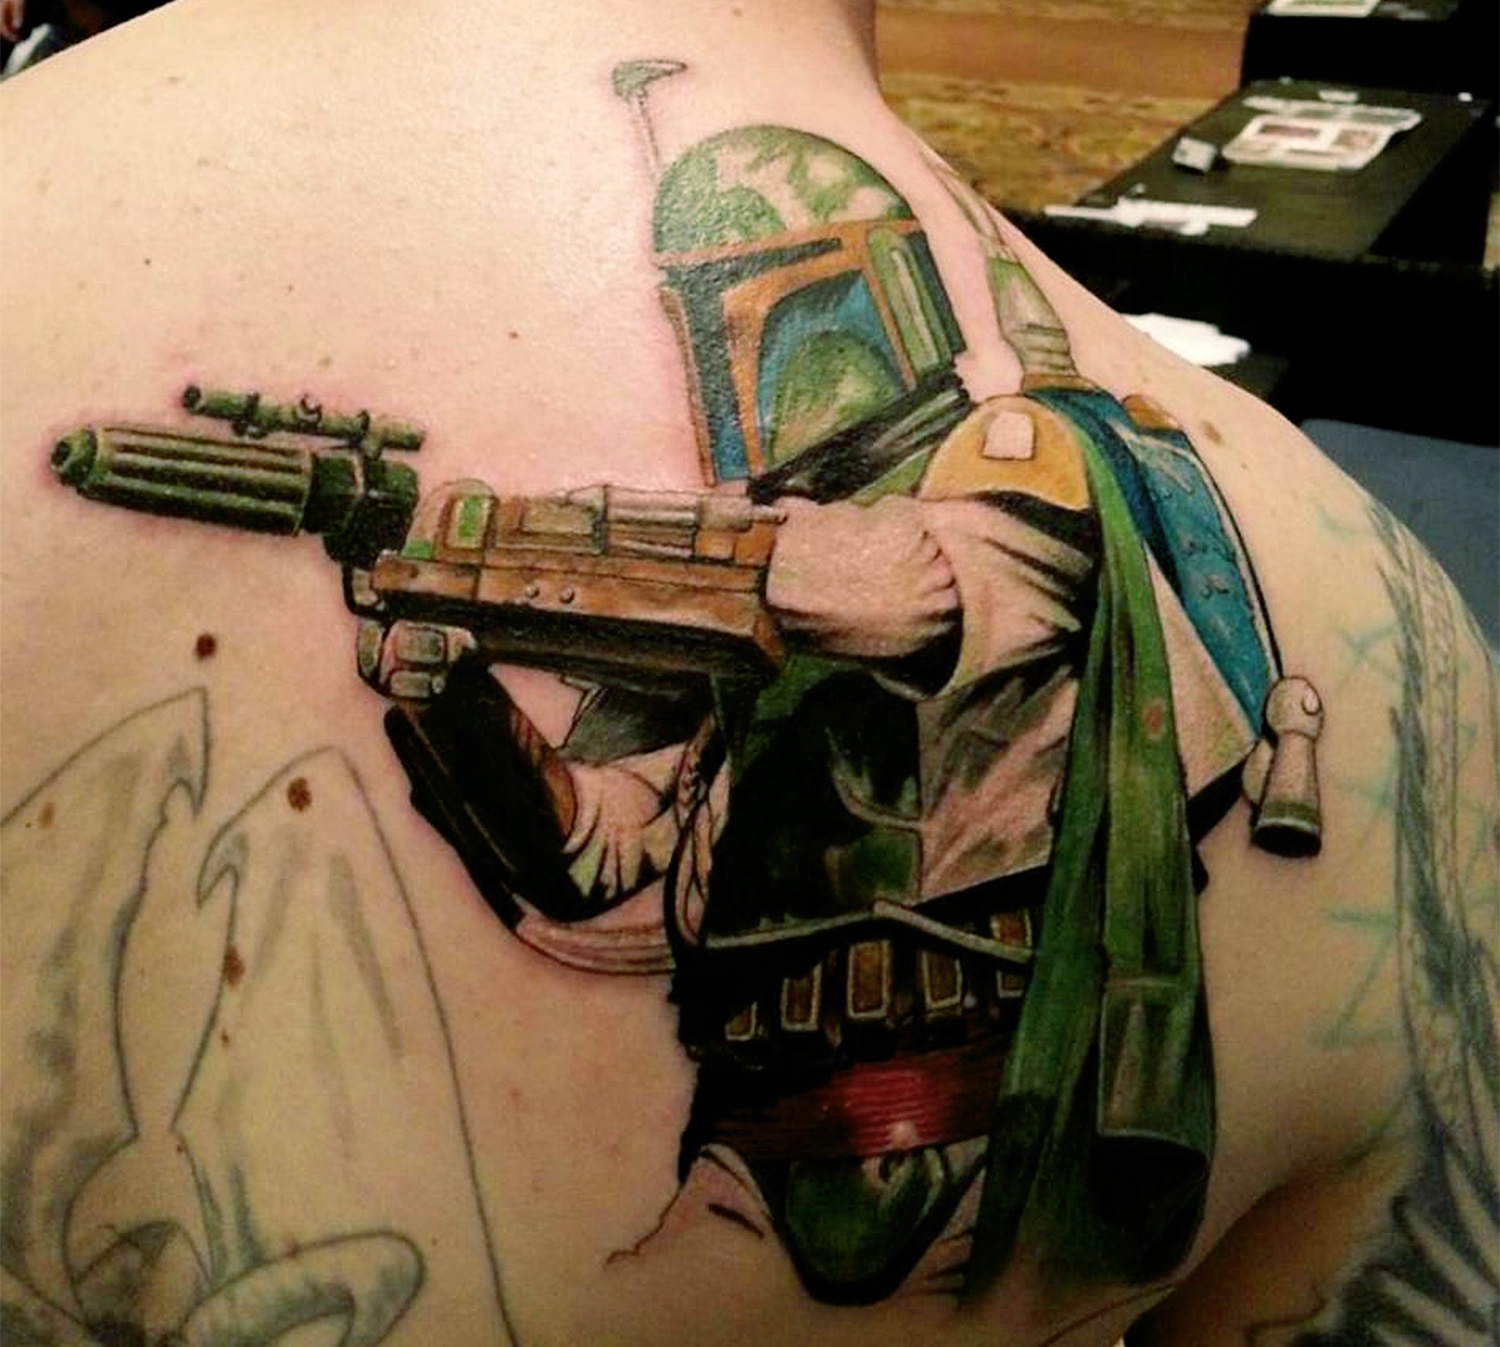 bobba fett with gun tattooed on back by chris musson, star wars